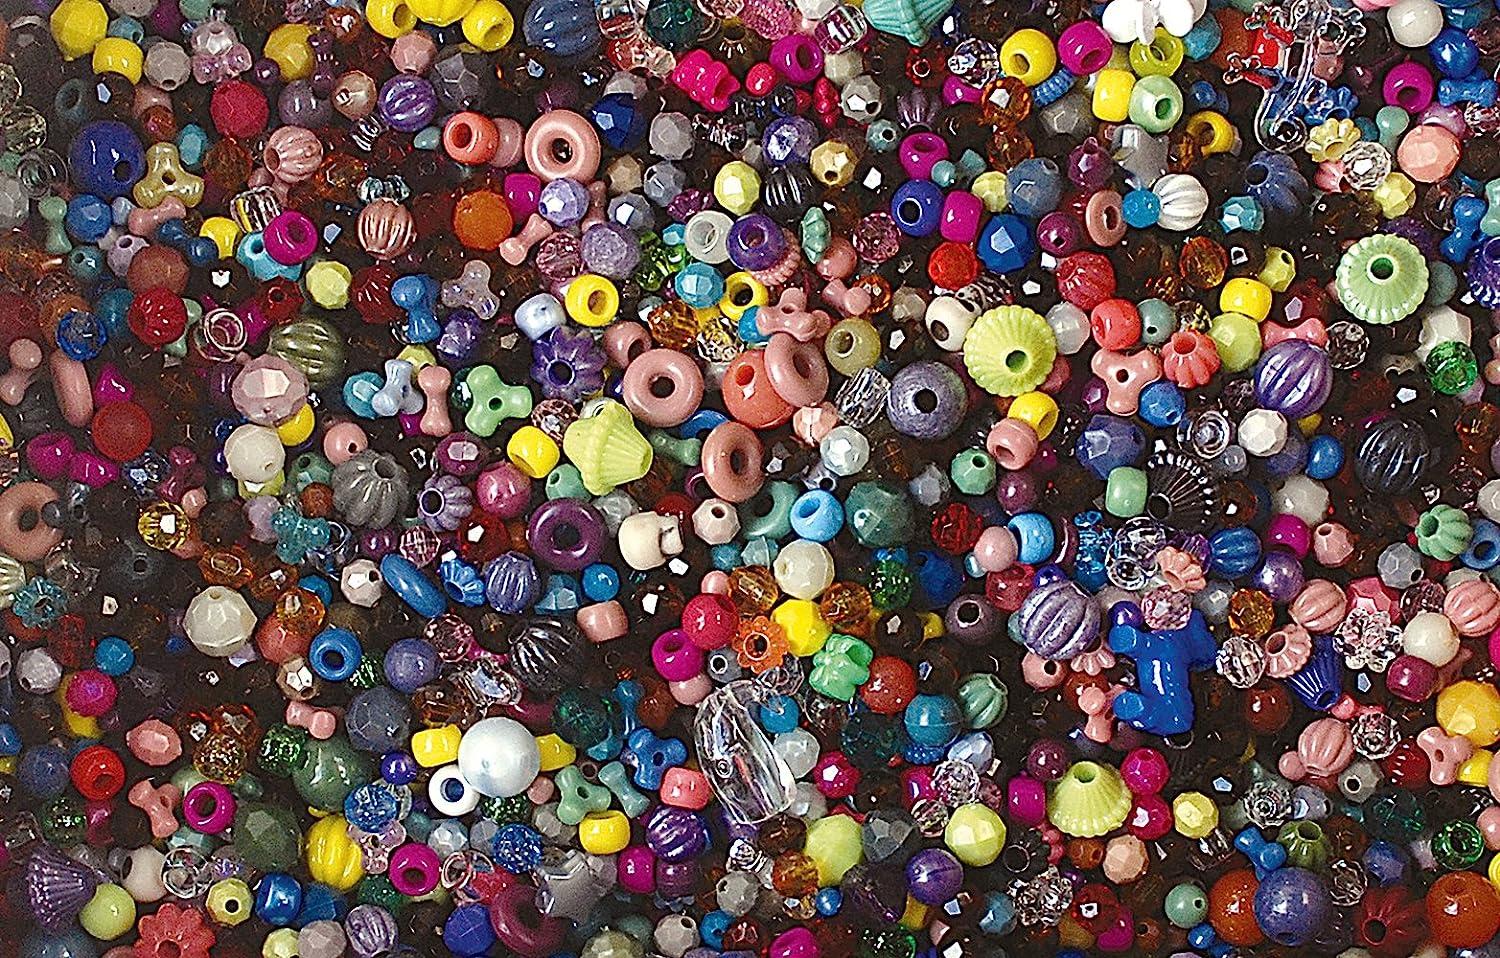 Cousin Mixed Plastic Beads 5lb, Assorted Shapes & Sizes